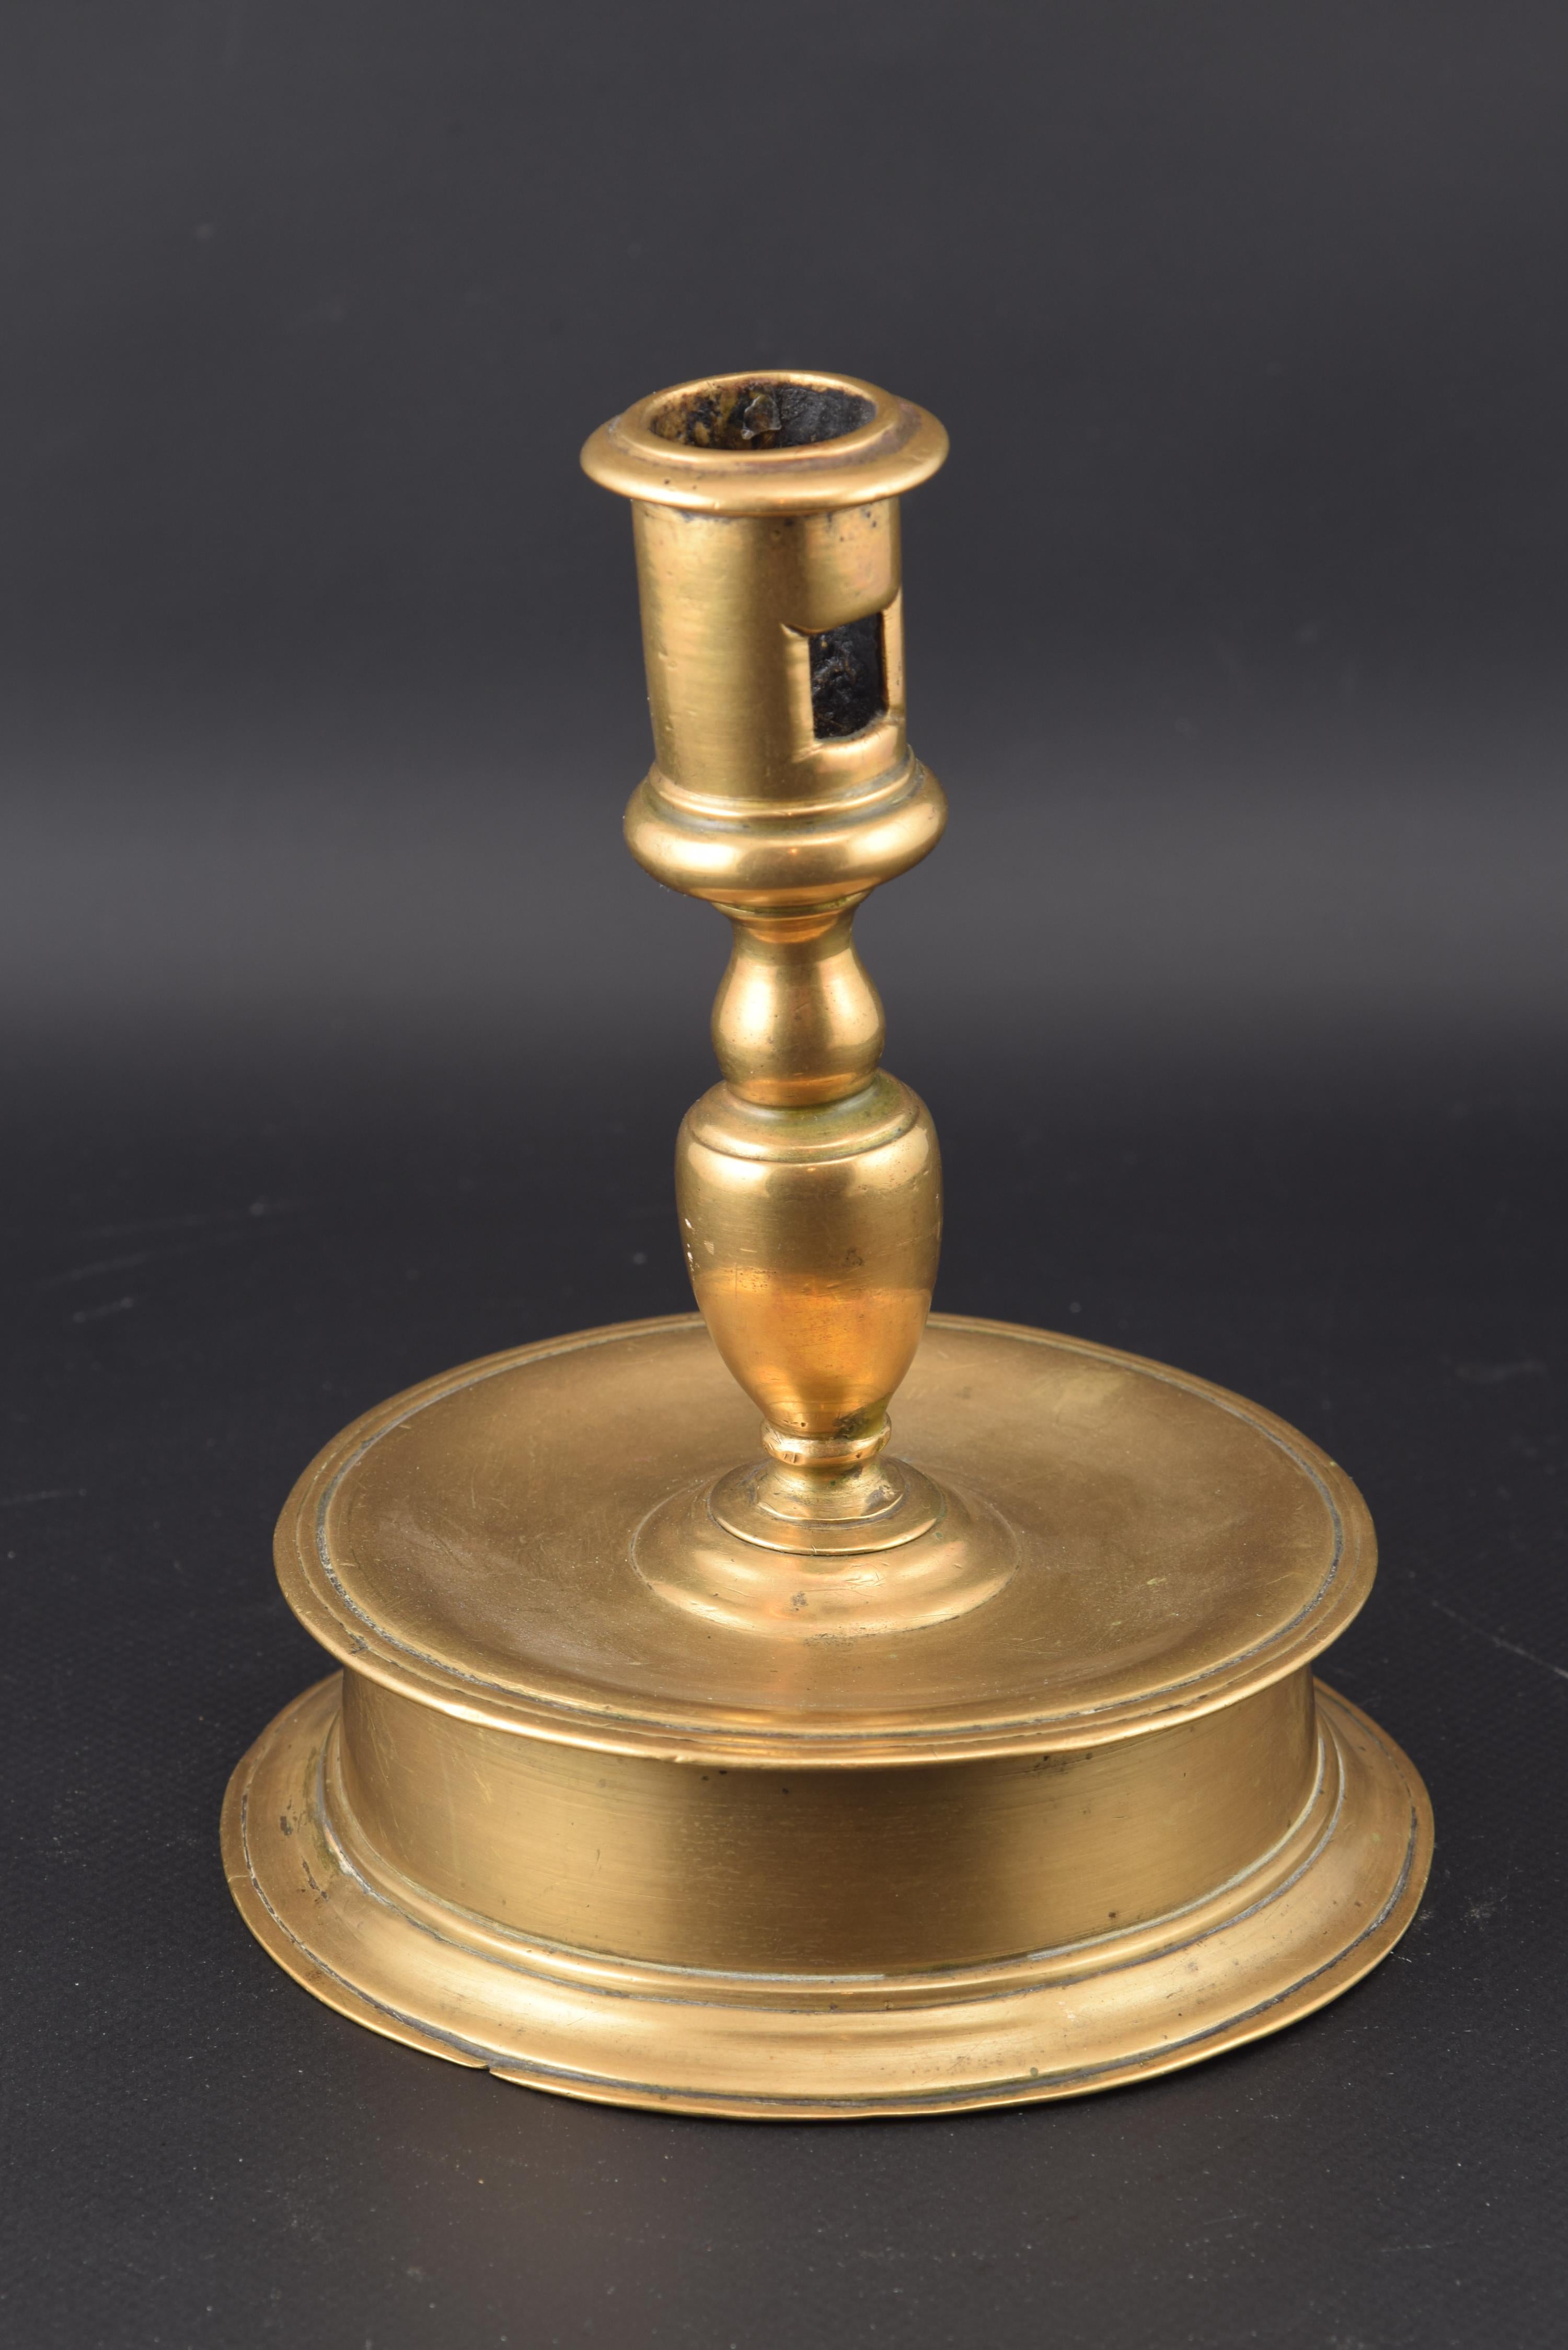 Candlestick of the type known as 